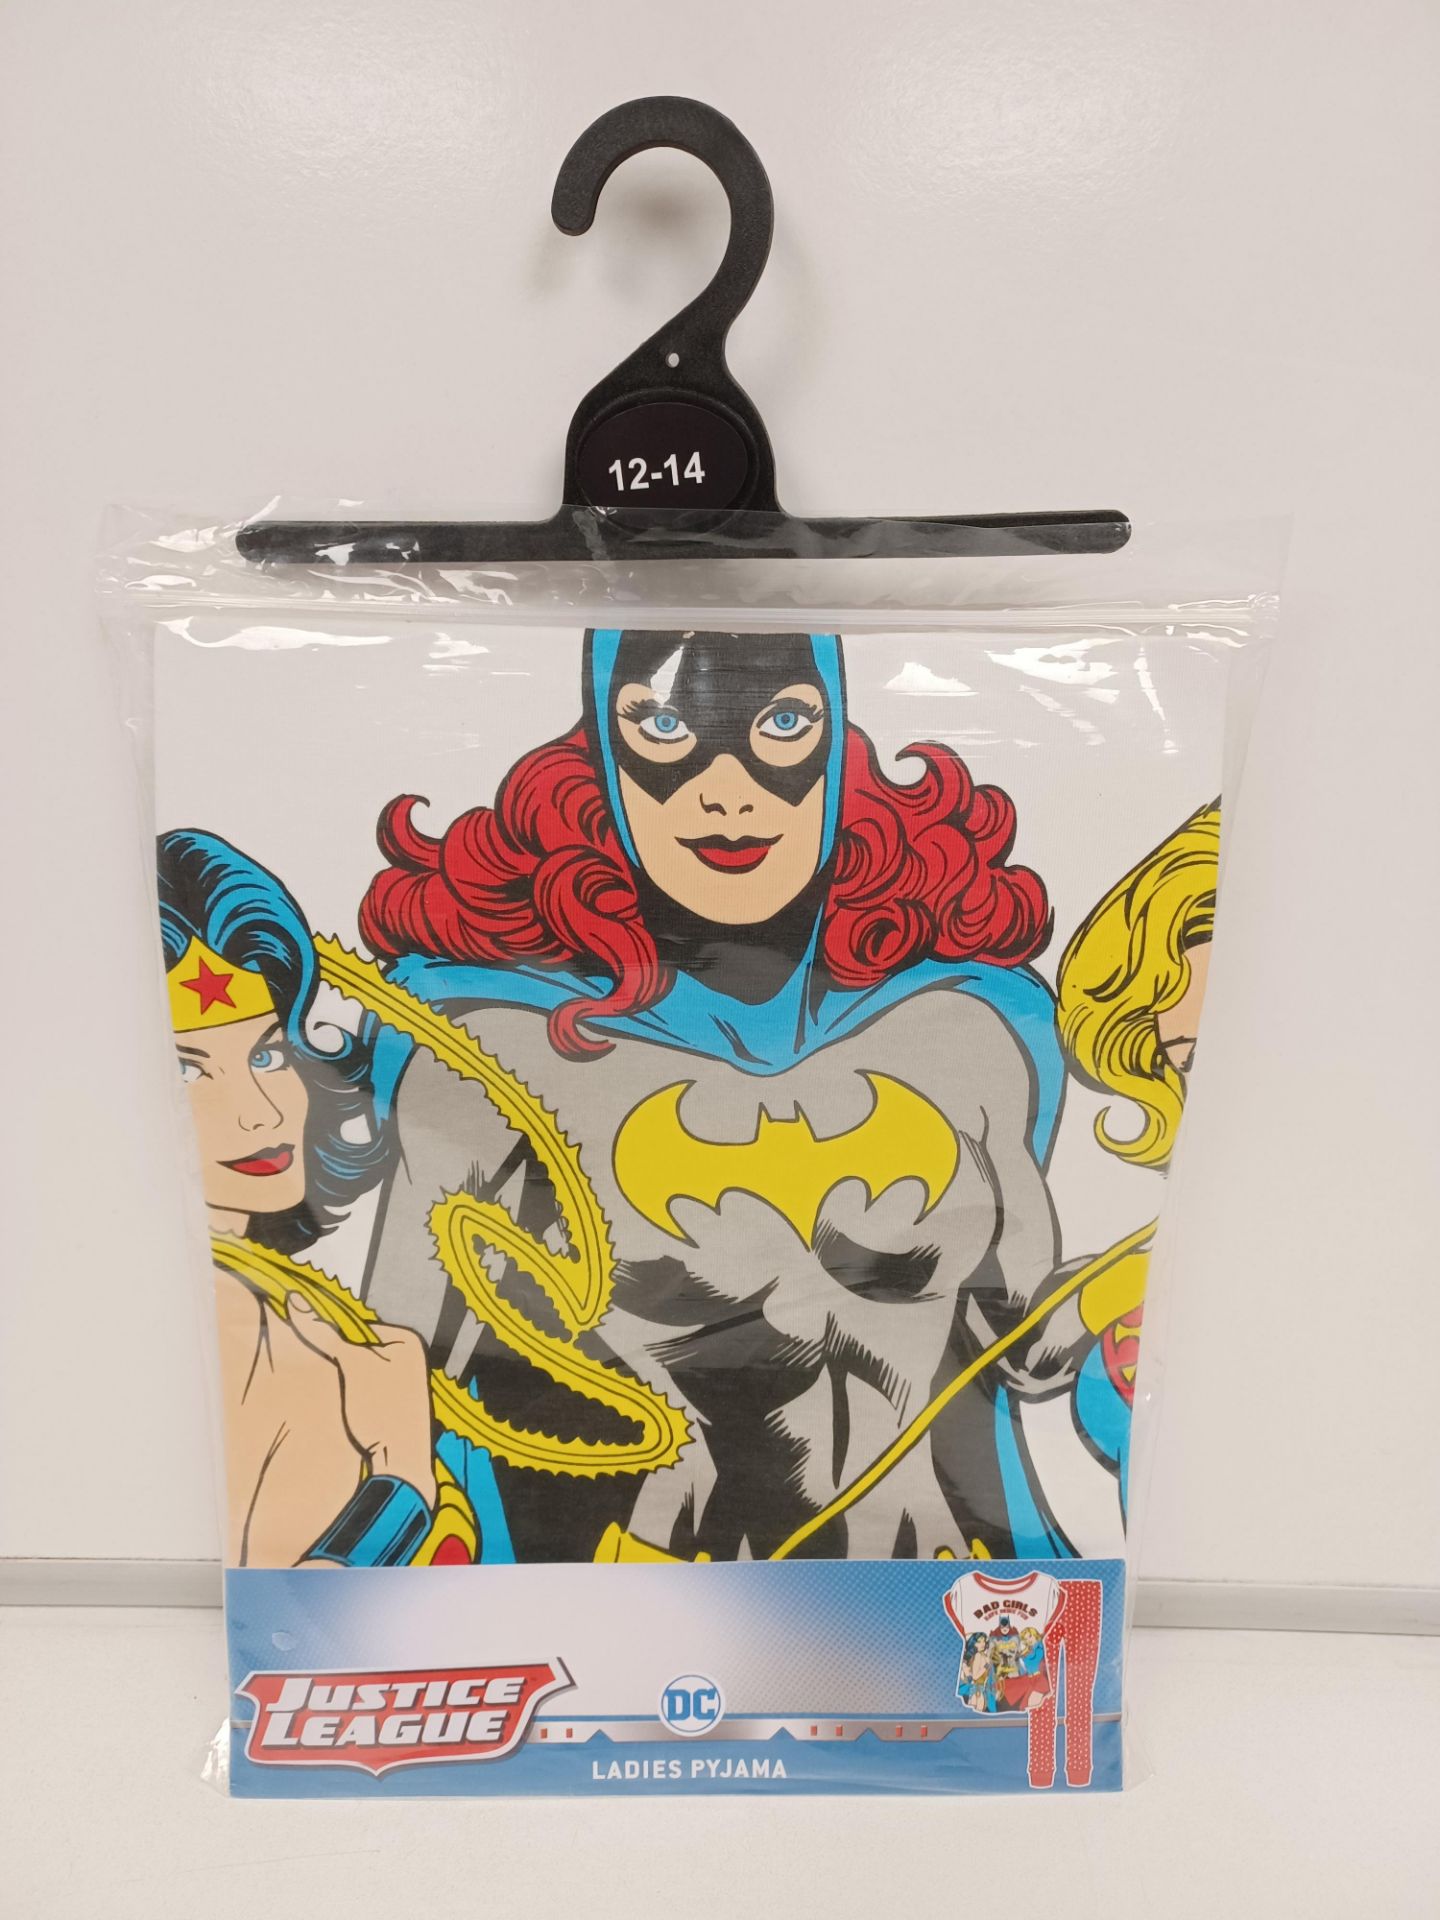 10 X NEW PACKAGED JUSTICE LEAGUE LADIES PYJAMA SETS. ROW 9